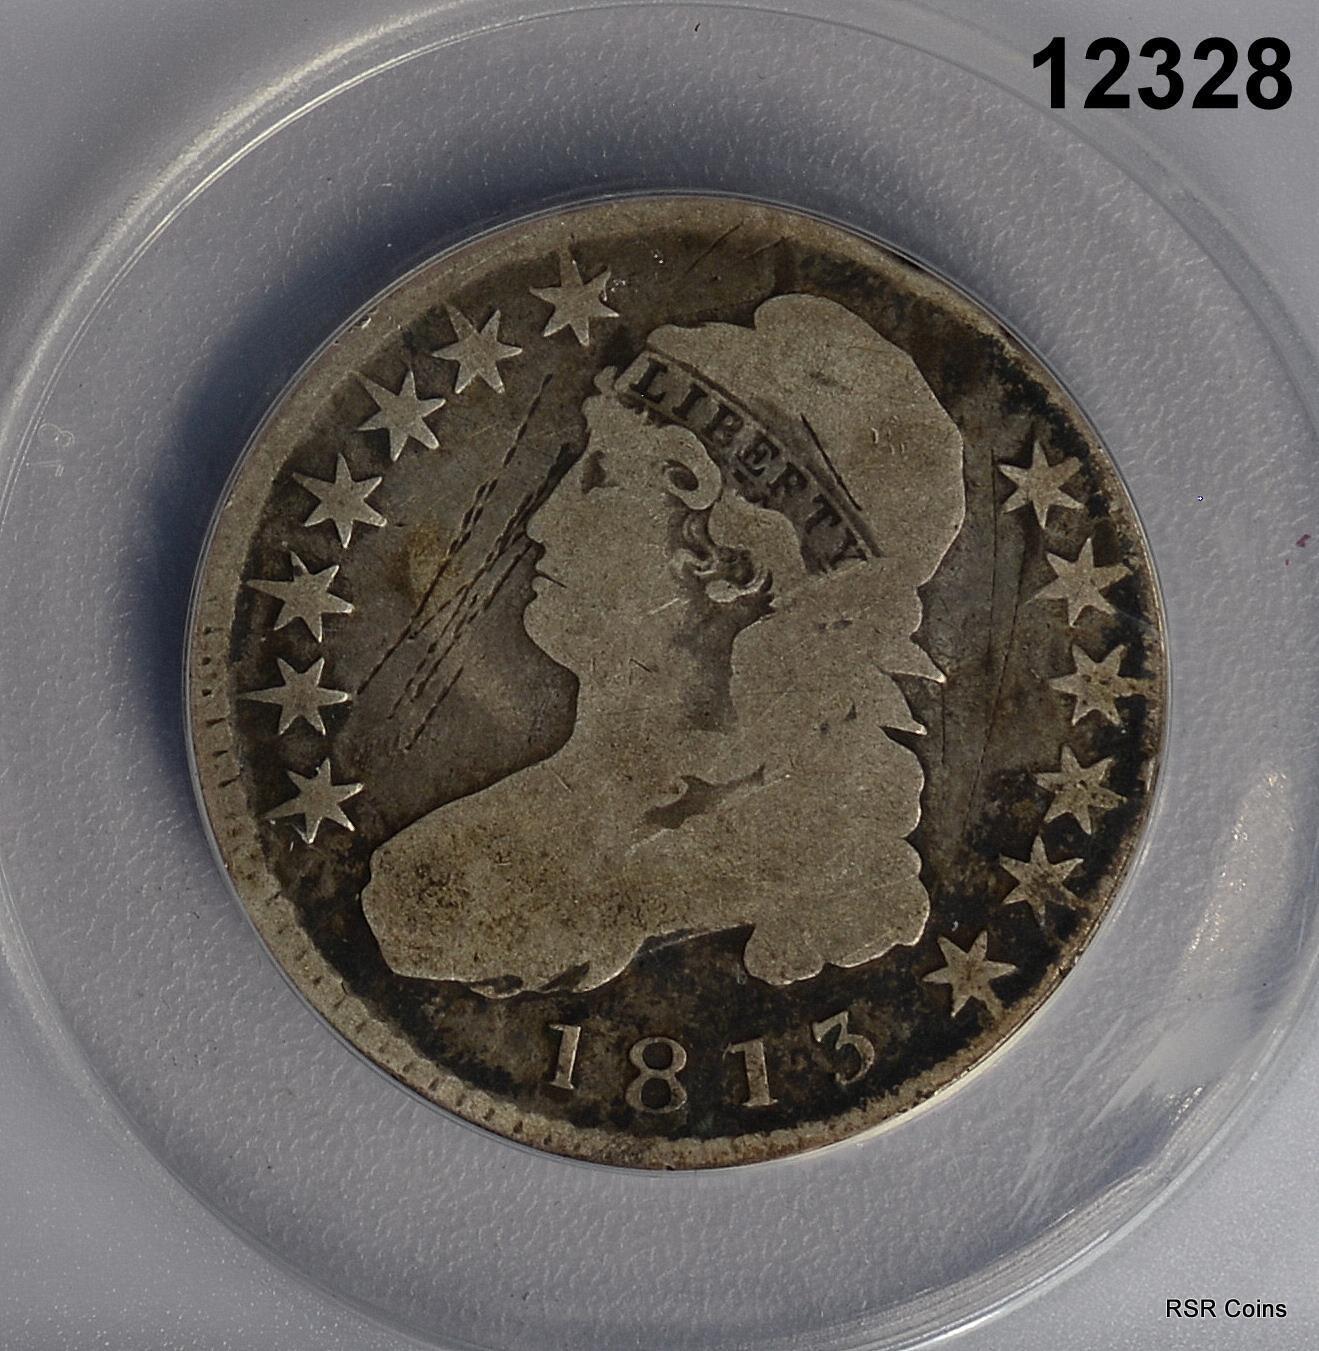 1813 CAPPED BUST HALF DOLLAR ANACS CERTIFIED GOOD 6 CLEANED CORRODED #12328